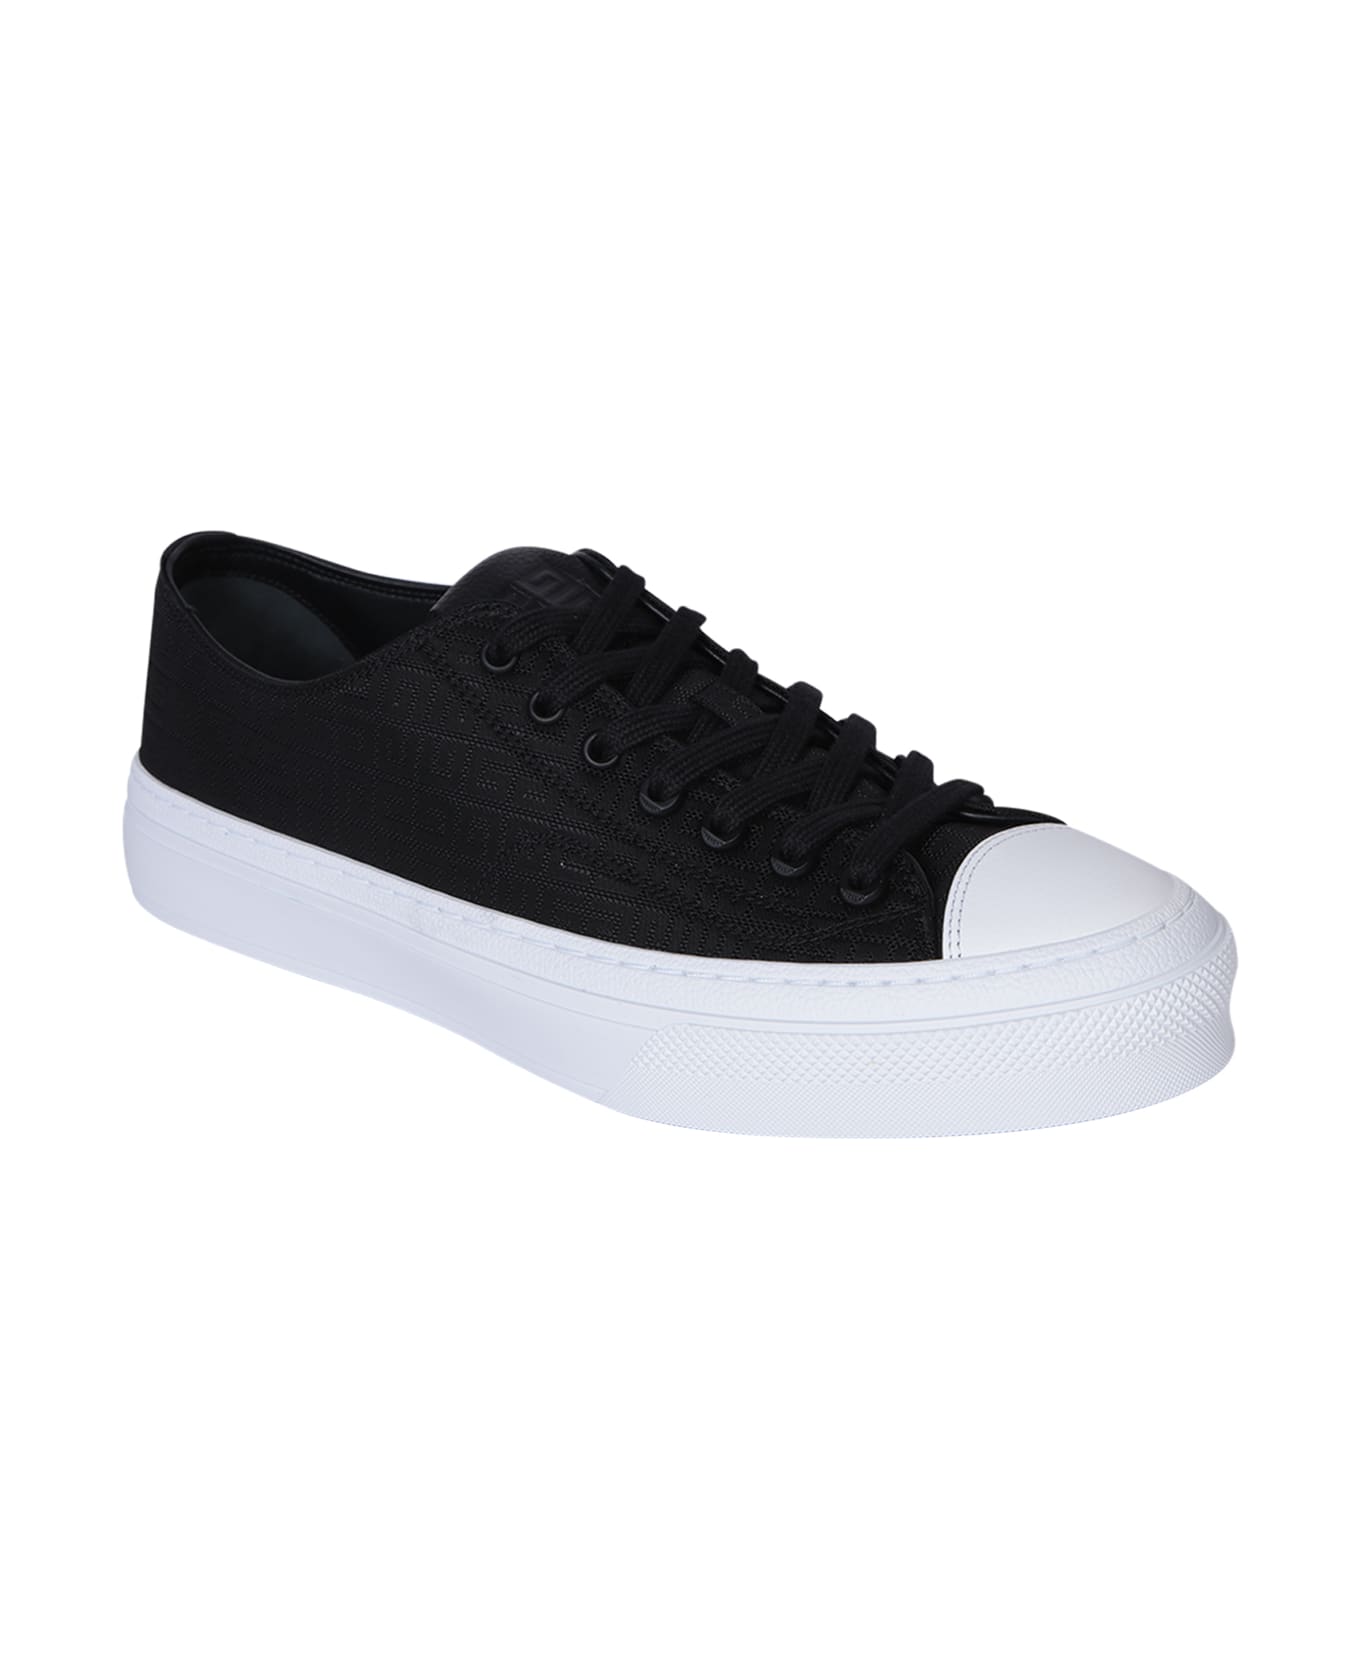 Givenchy City Low Sneakers - Black